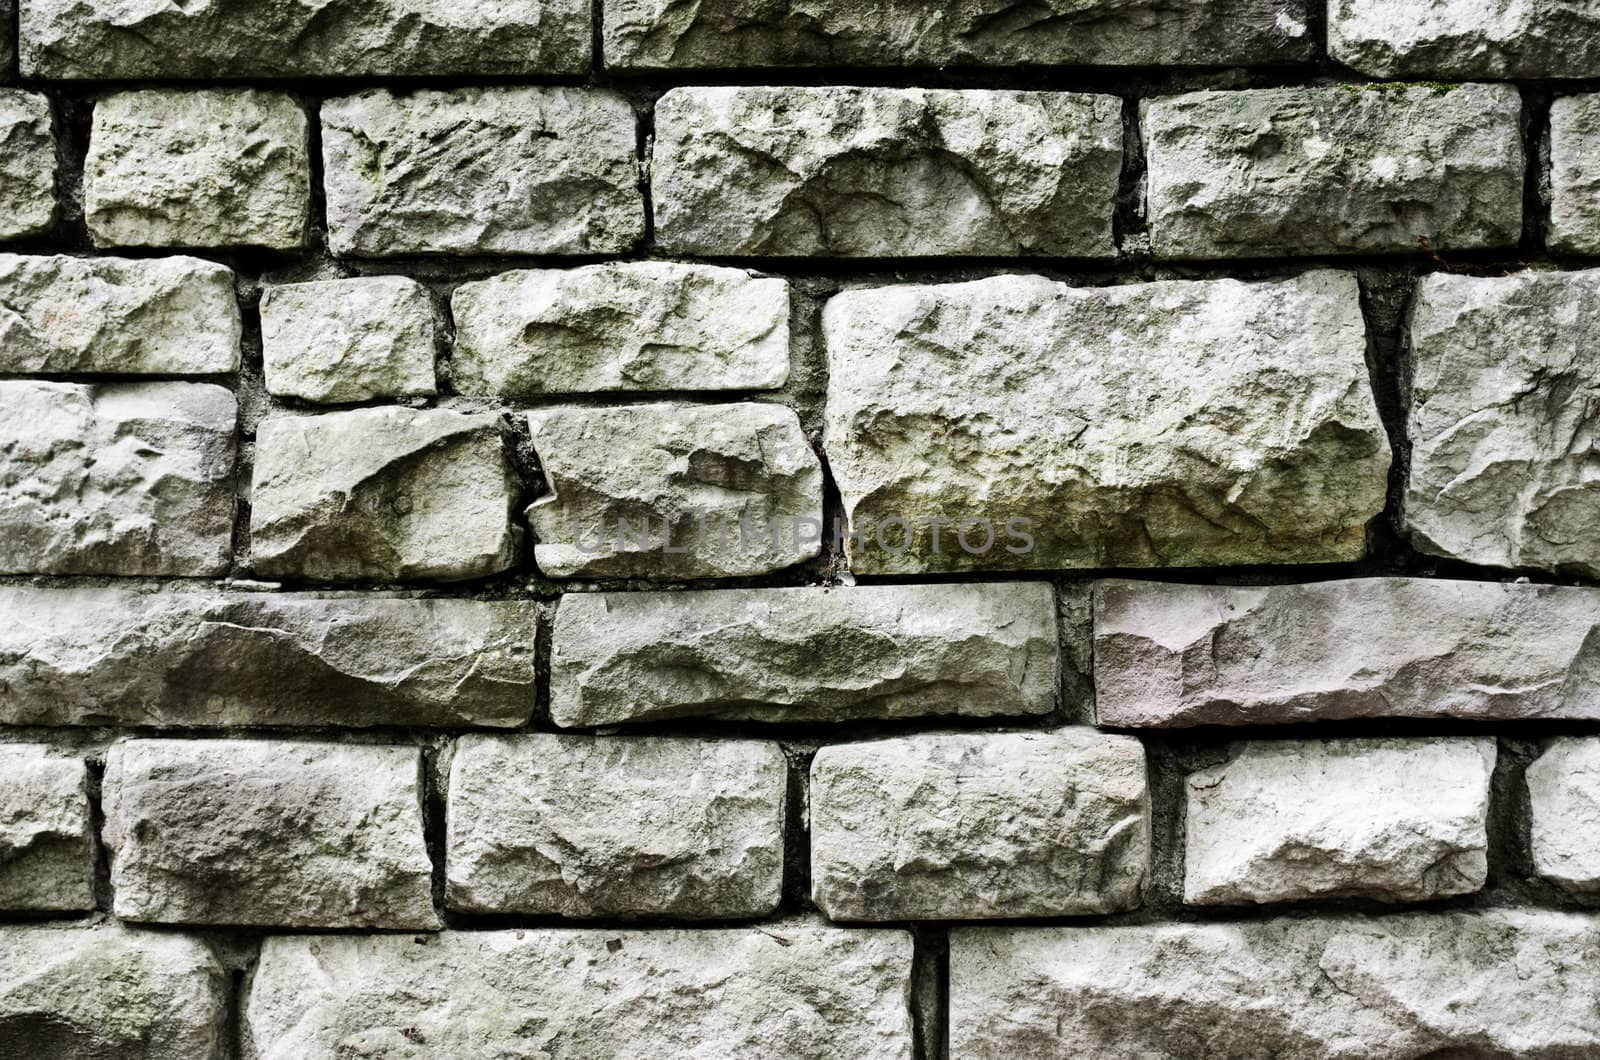 High contrast image of an old stone wall.